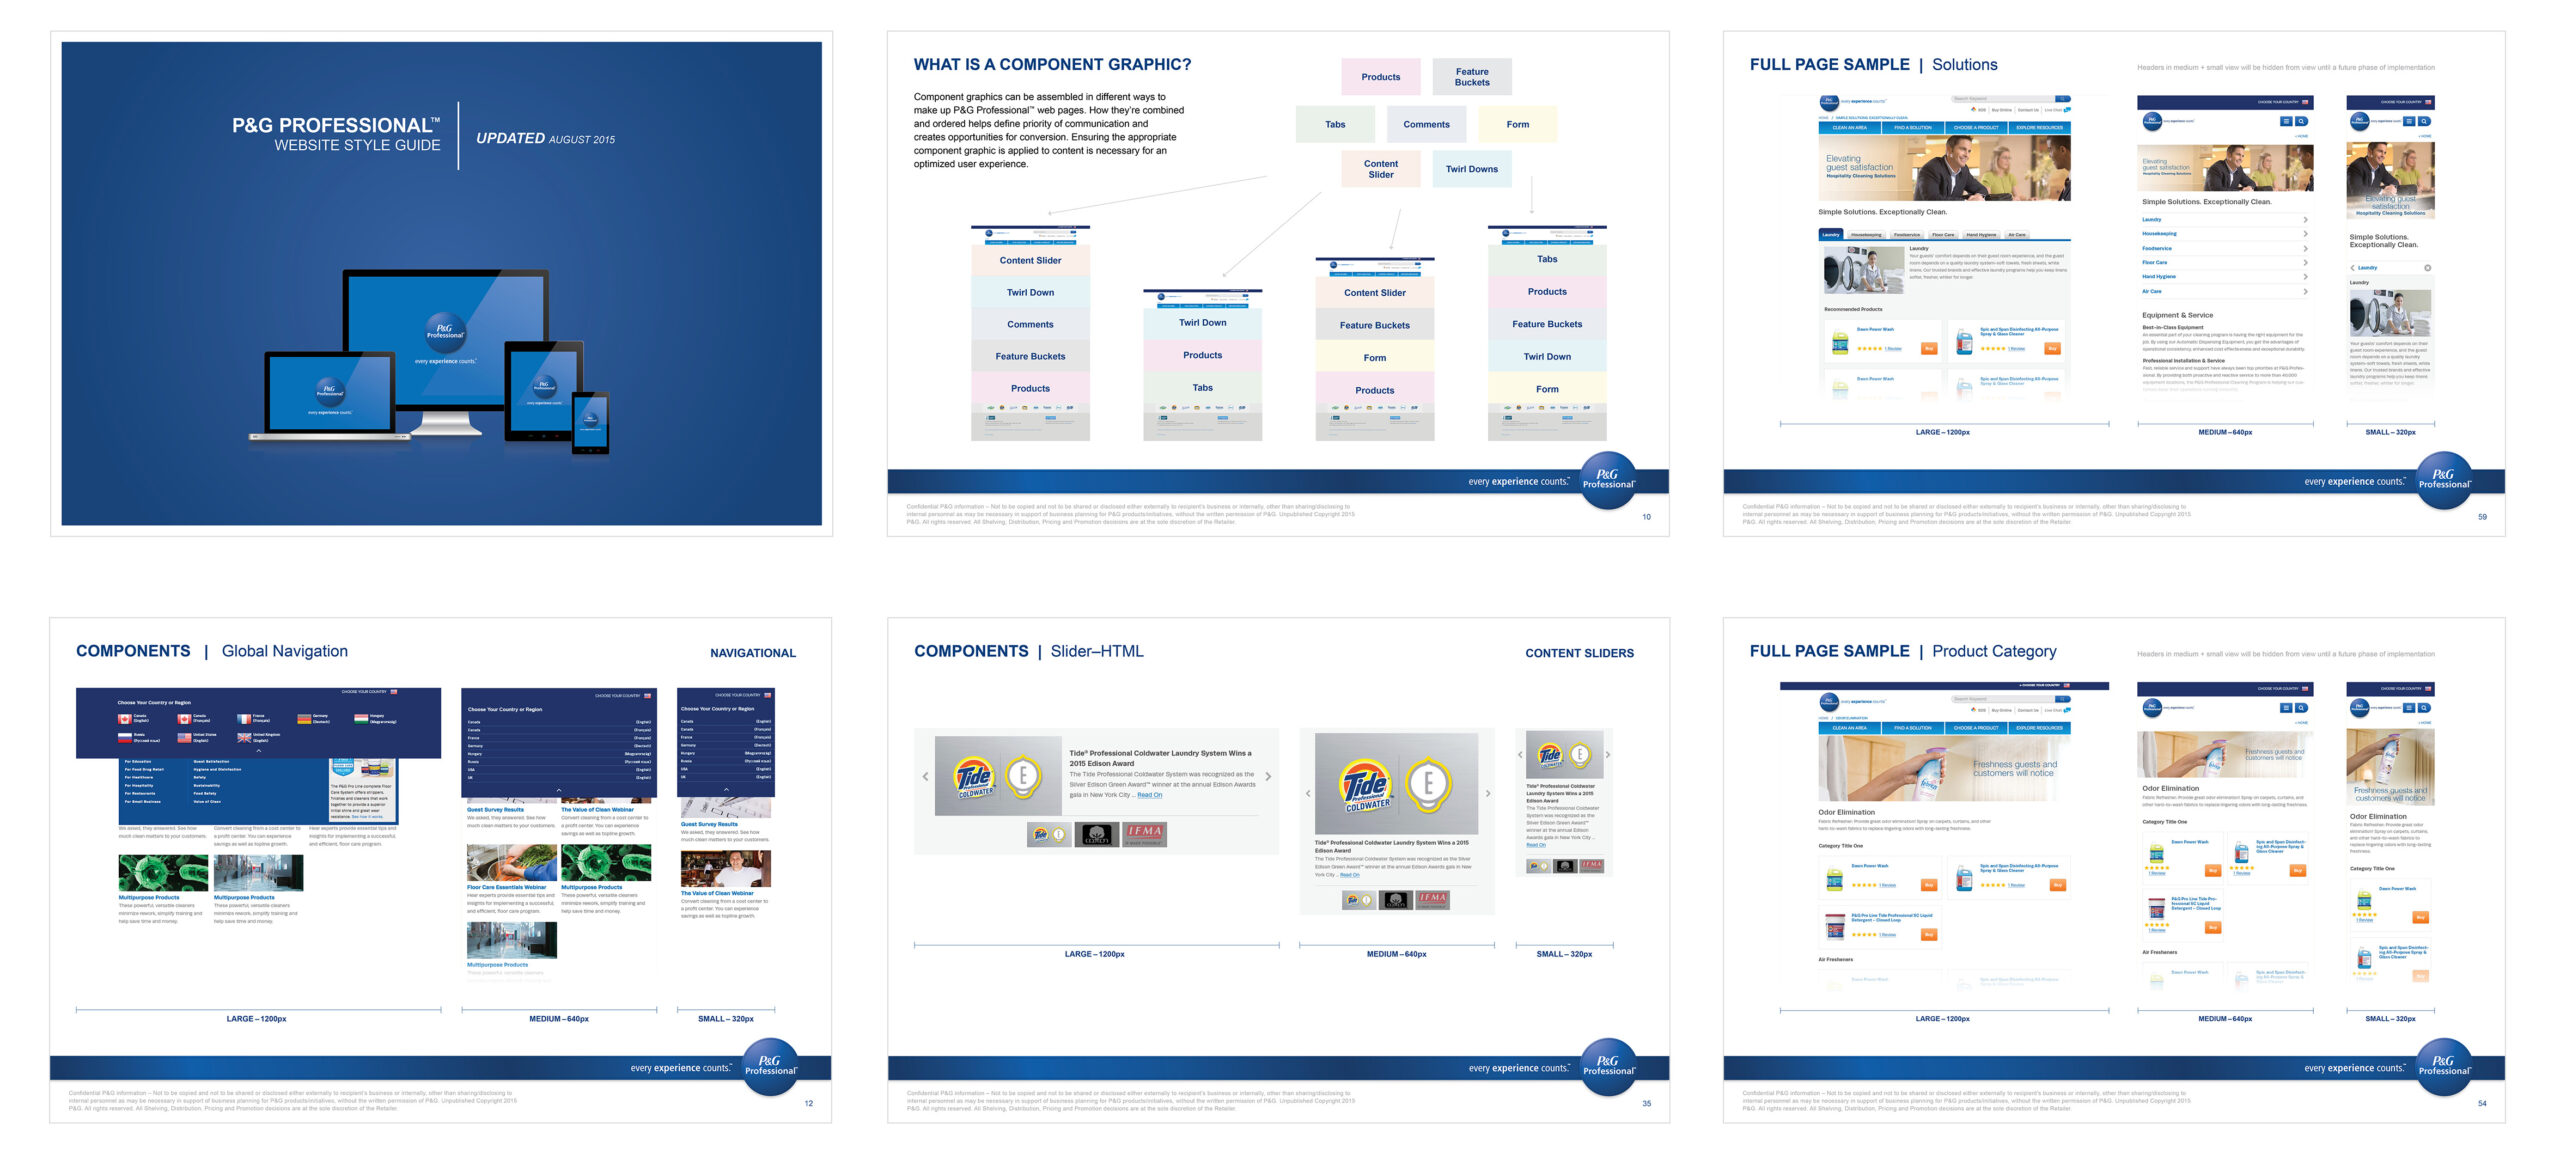 Procter and Gamble website style guide